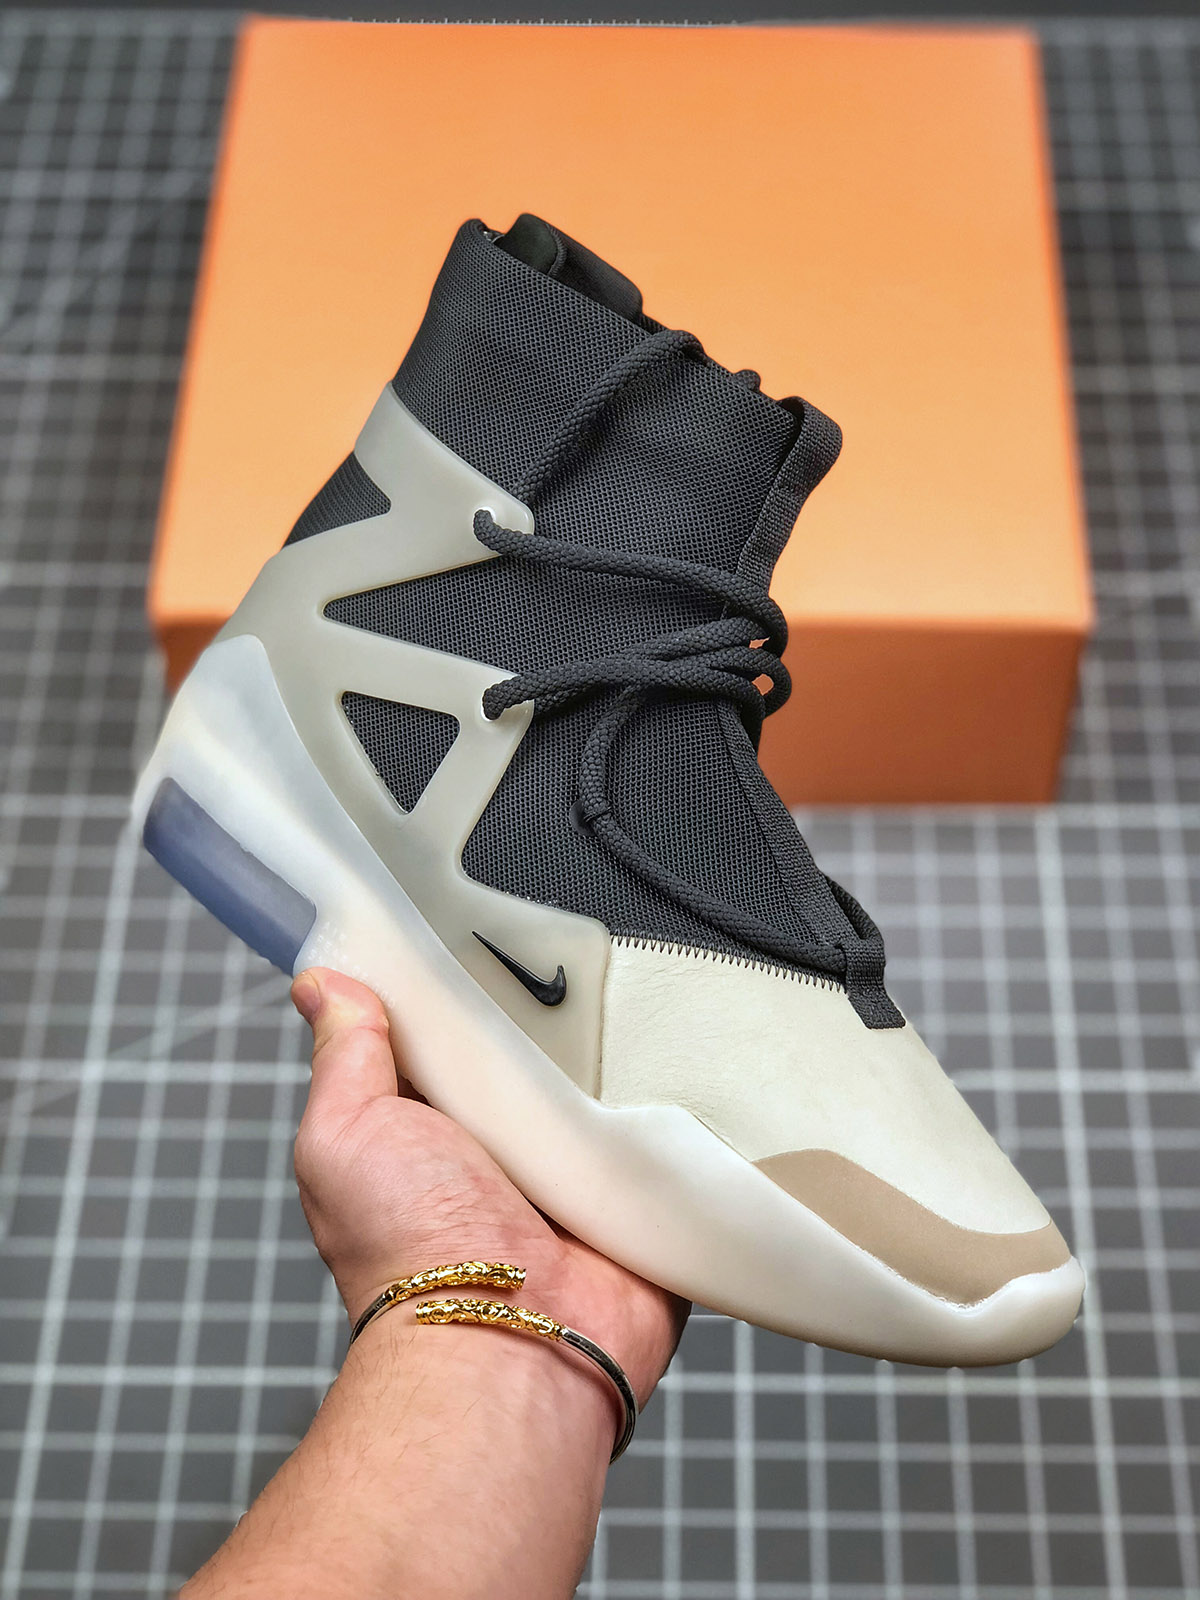 Nike Air Fear of God 1 String “The Question” AR4237-902 For Sale 